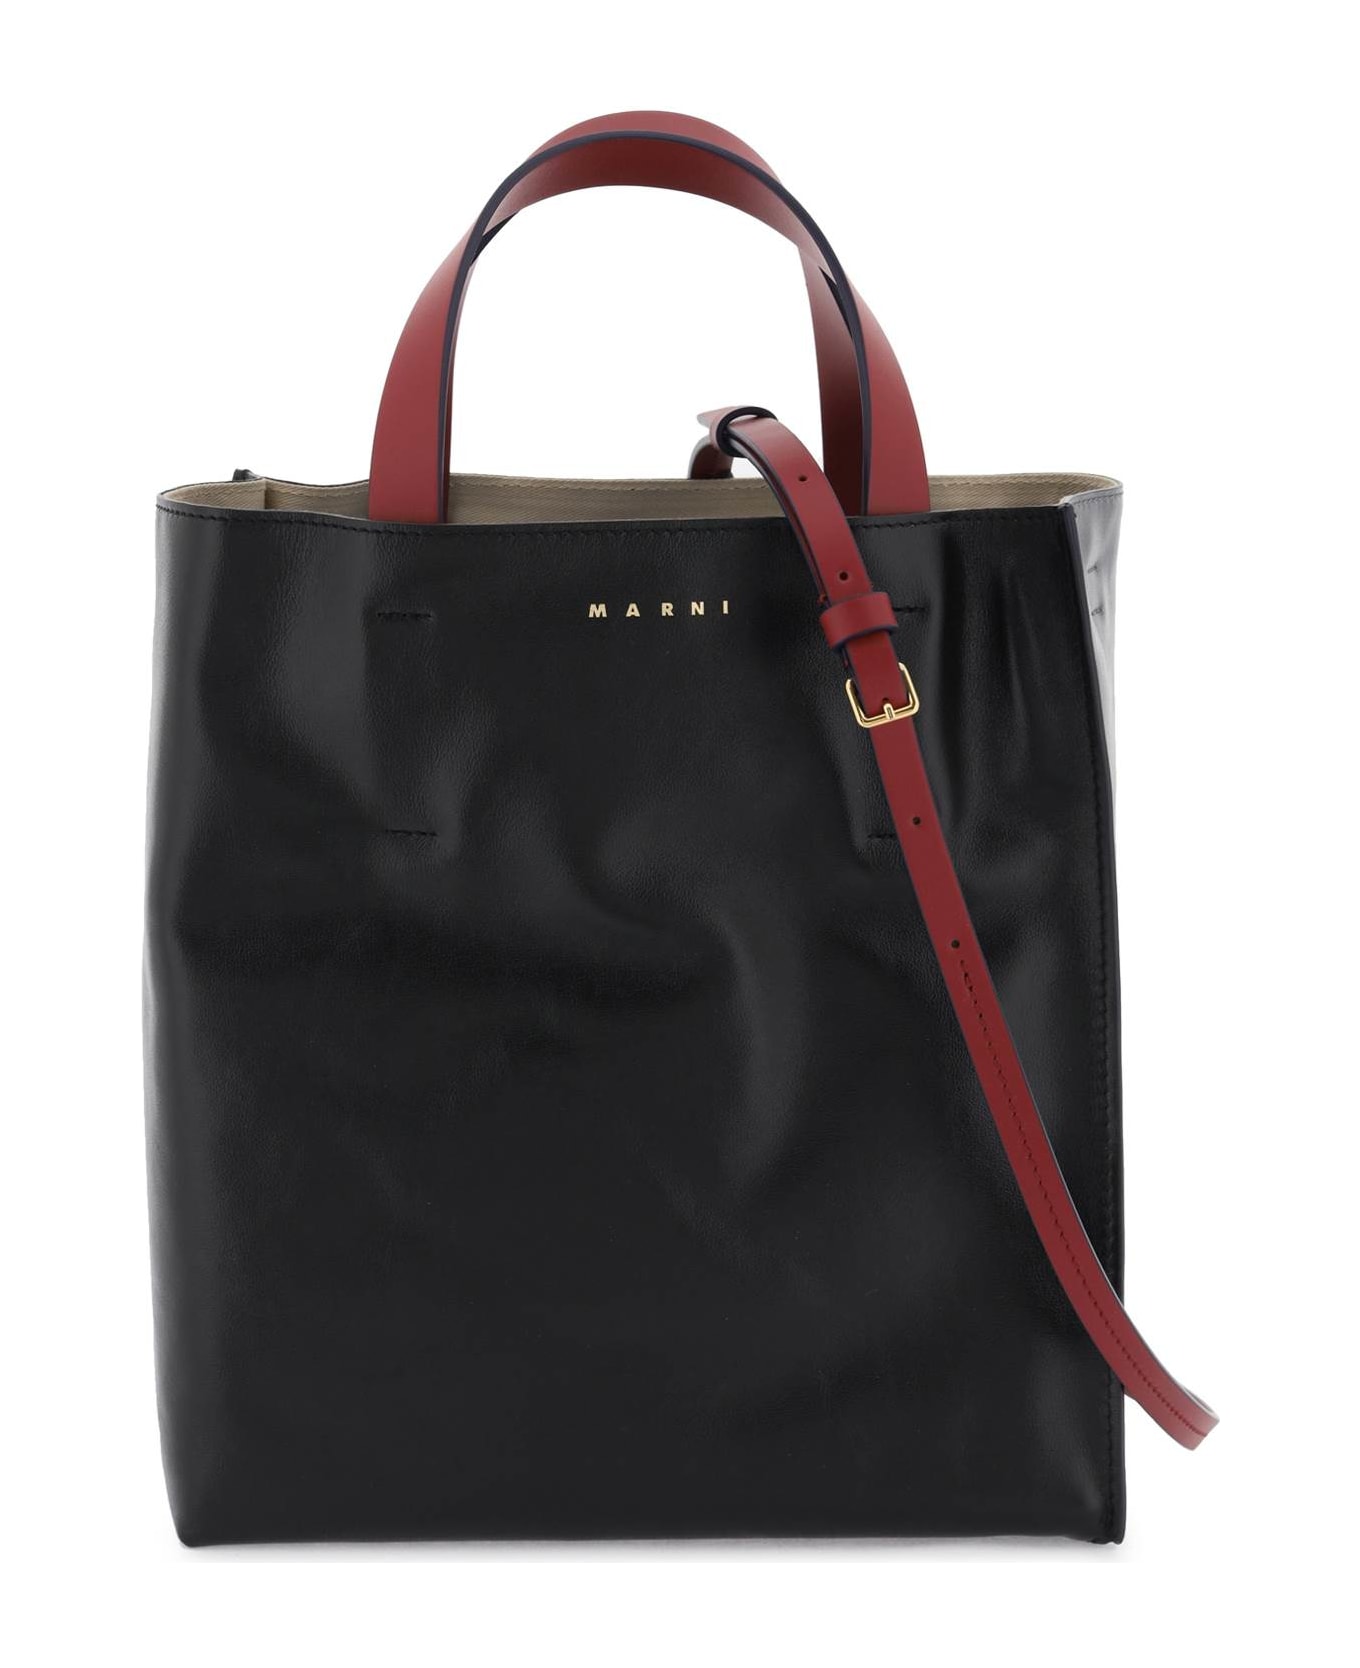 Marni Museo Bag In Black Leather - Black トートバッグ